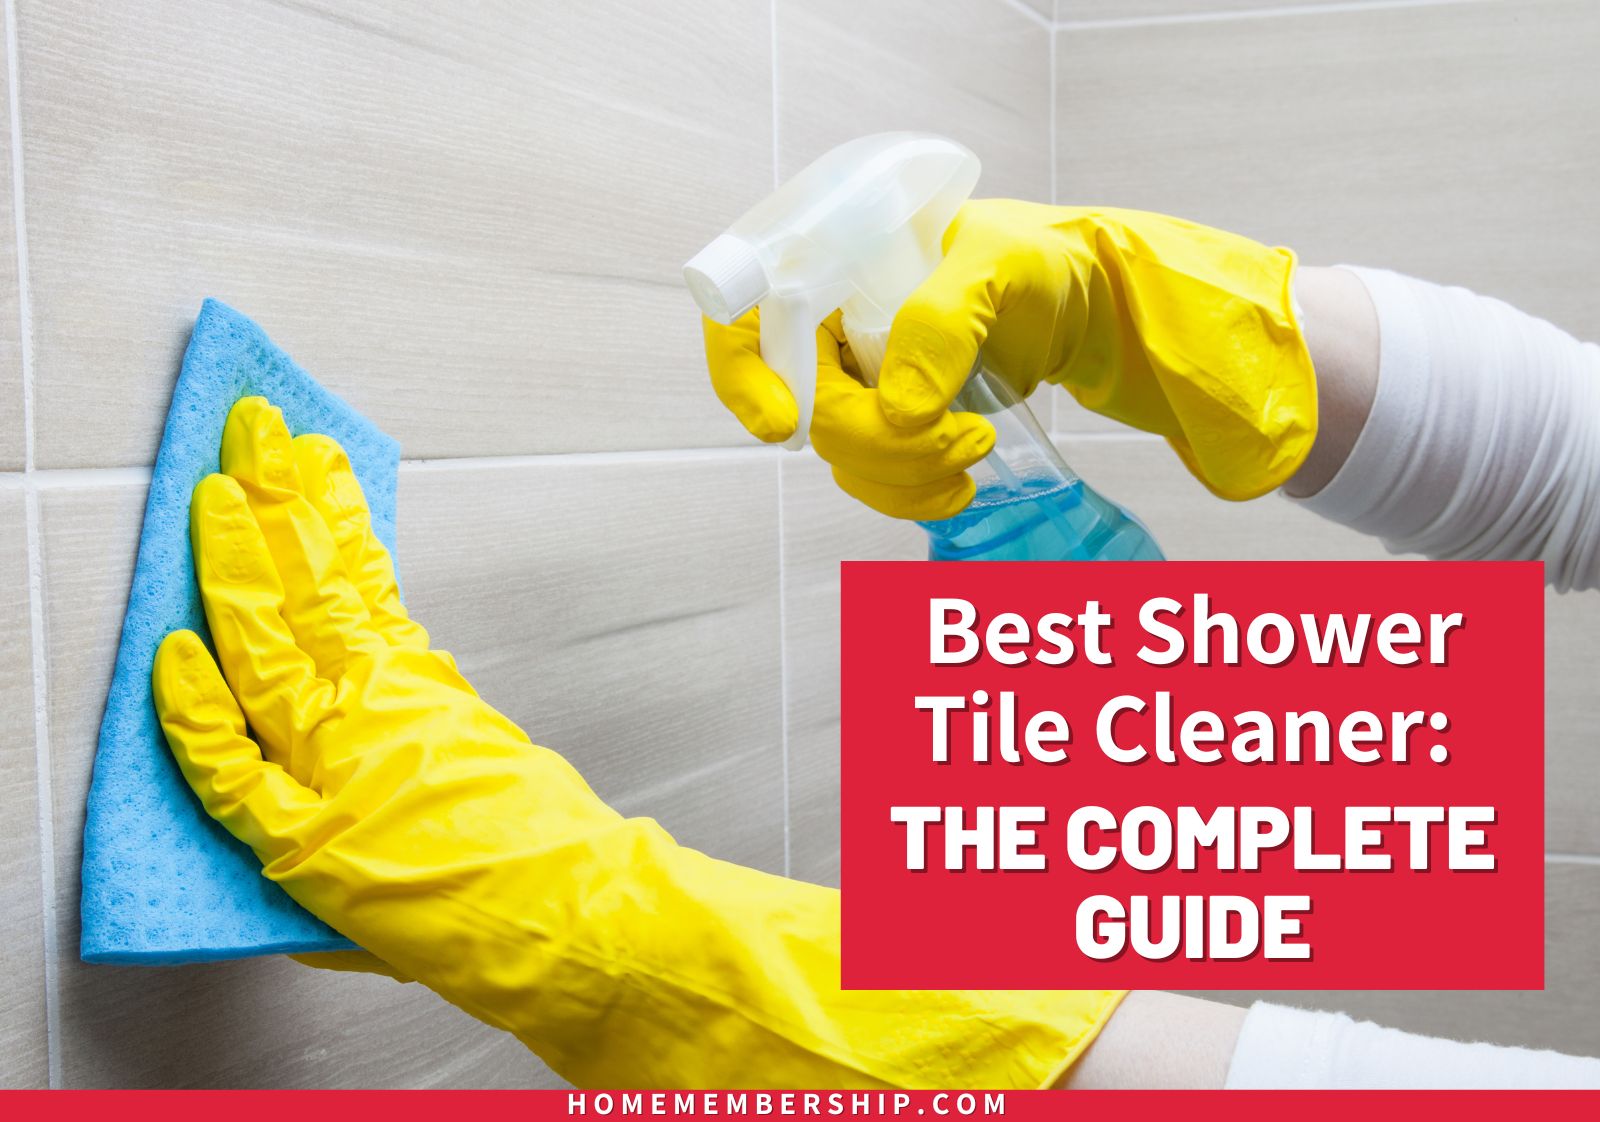 The Ultimate Guide to Cleaning Grout: 10 DIY Tile & Grout Cleaners